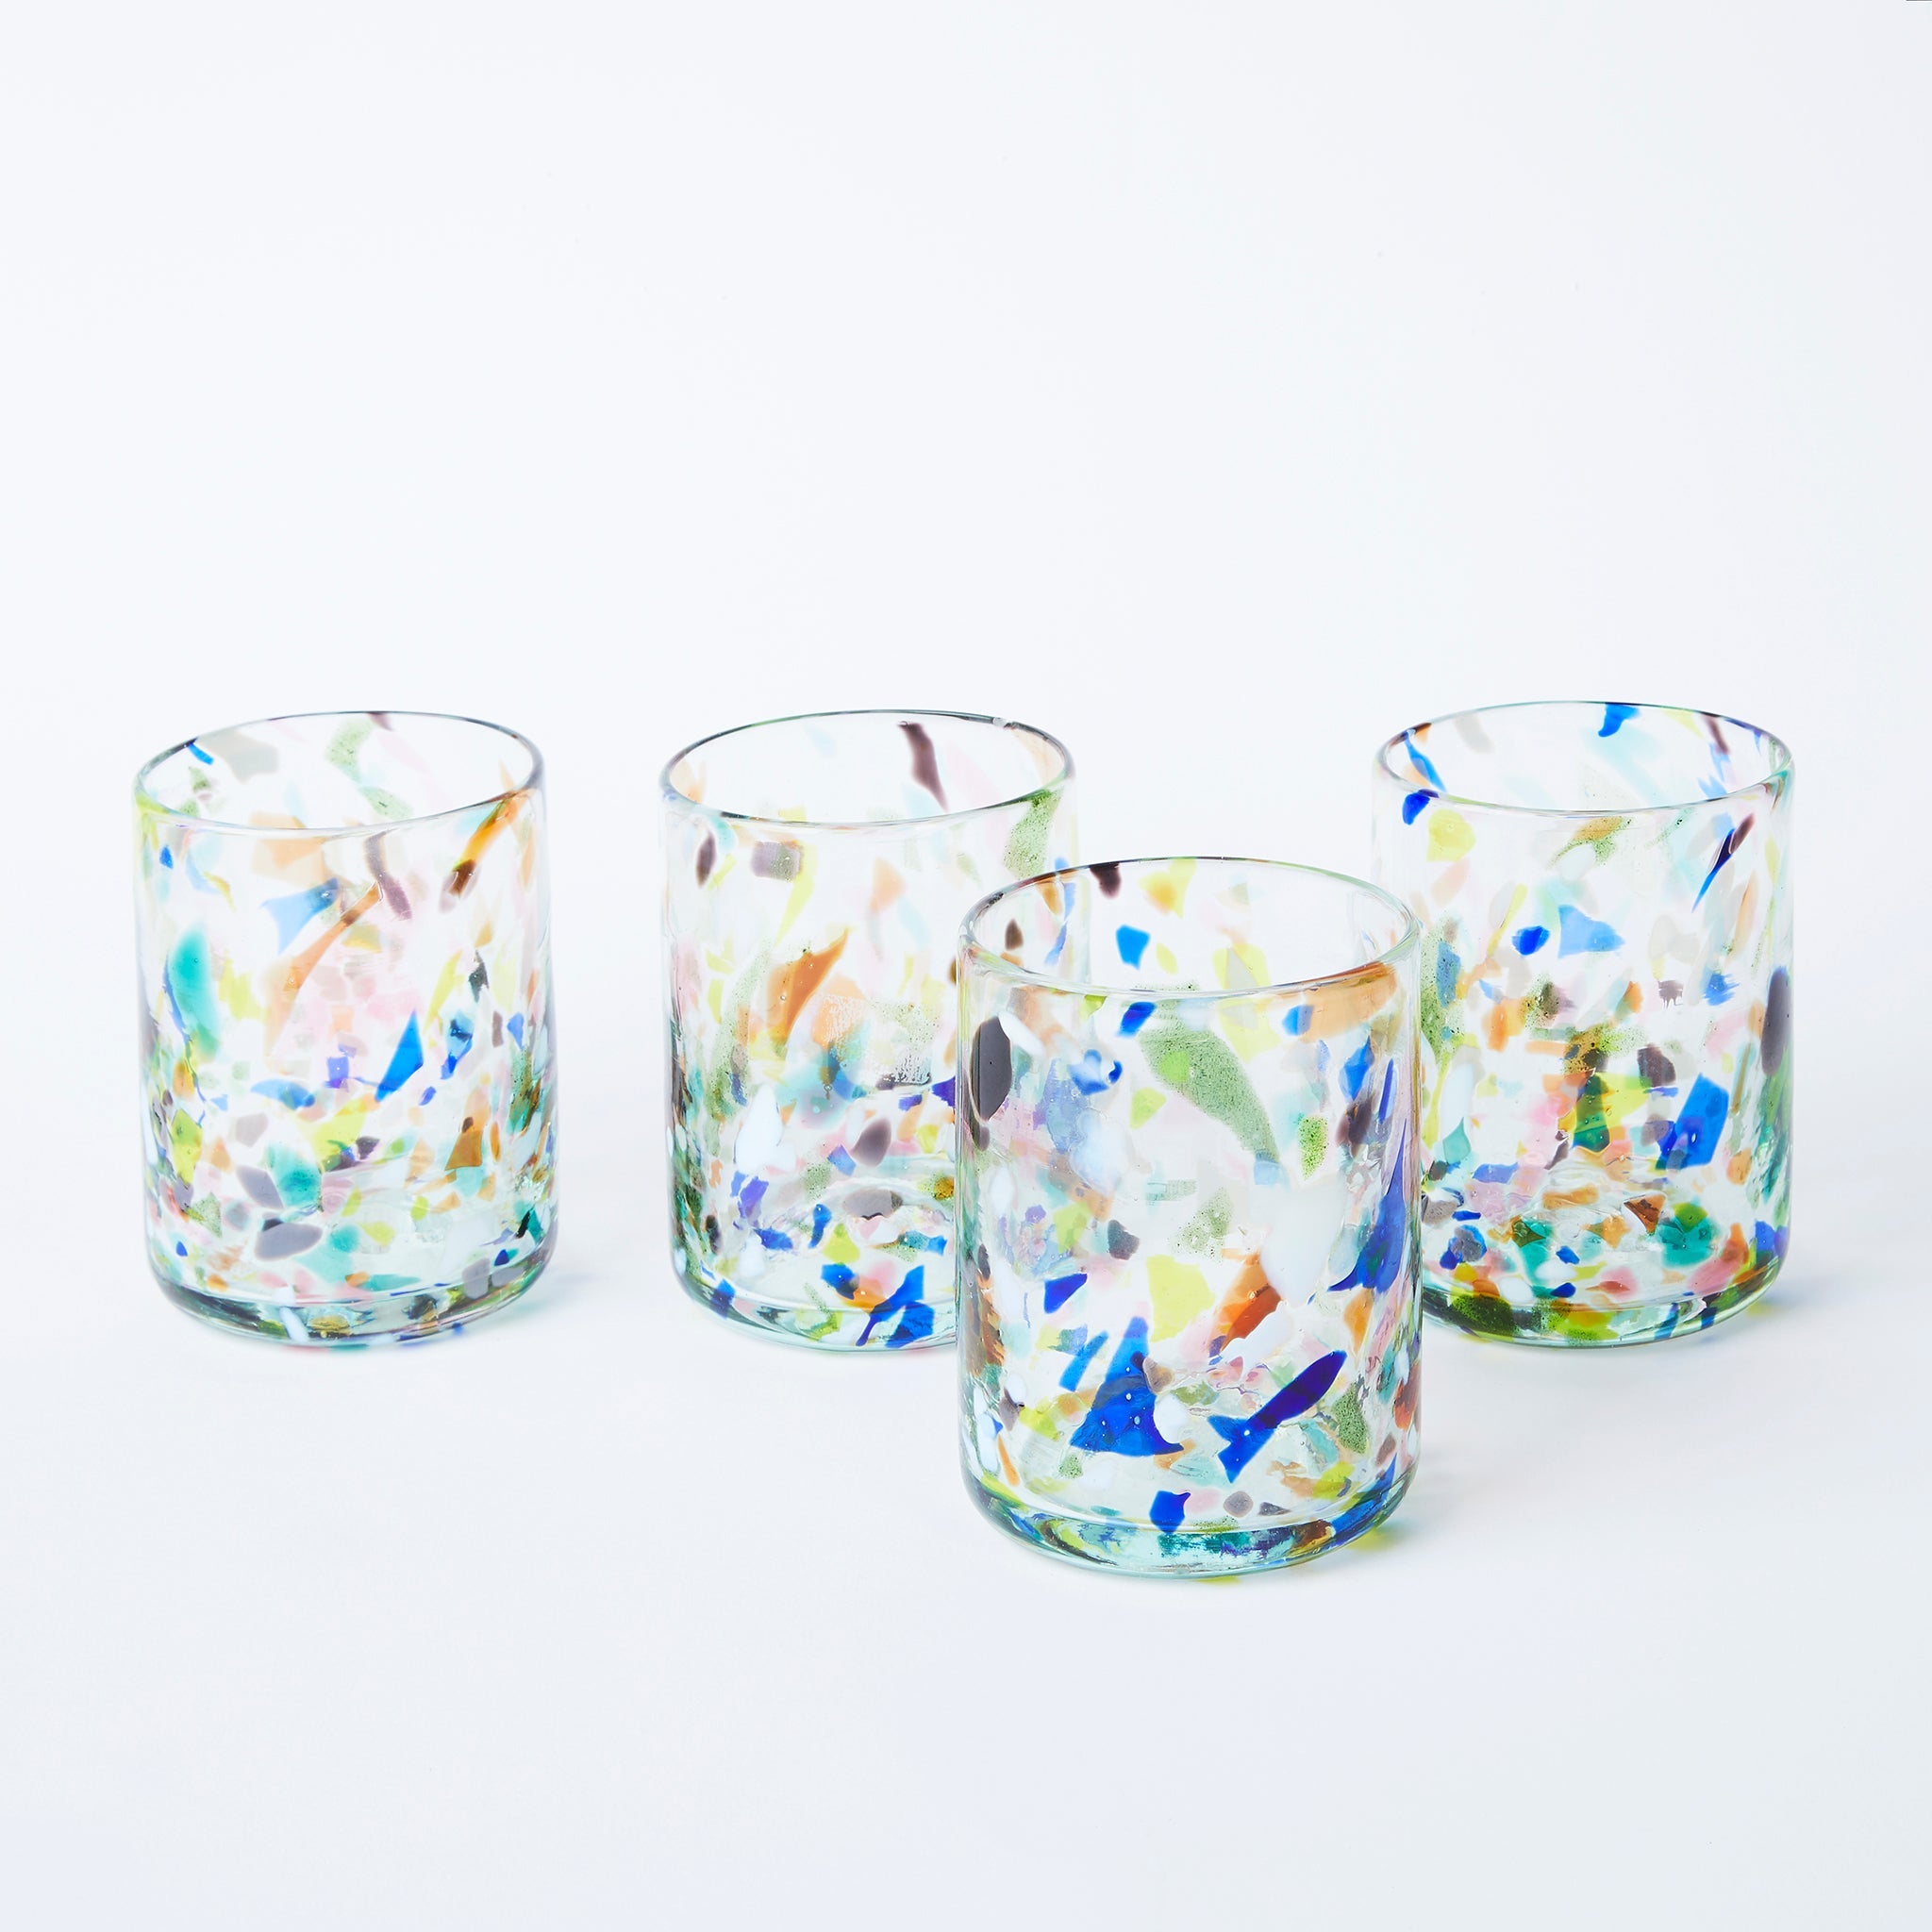 Terrazzo drinking glasses set of 4, L - By Native